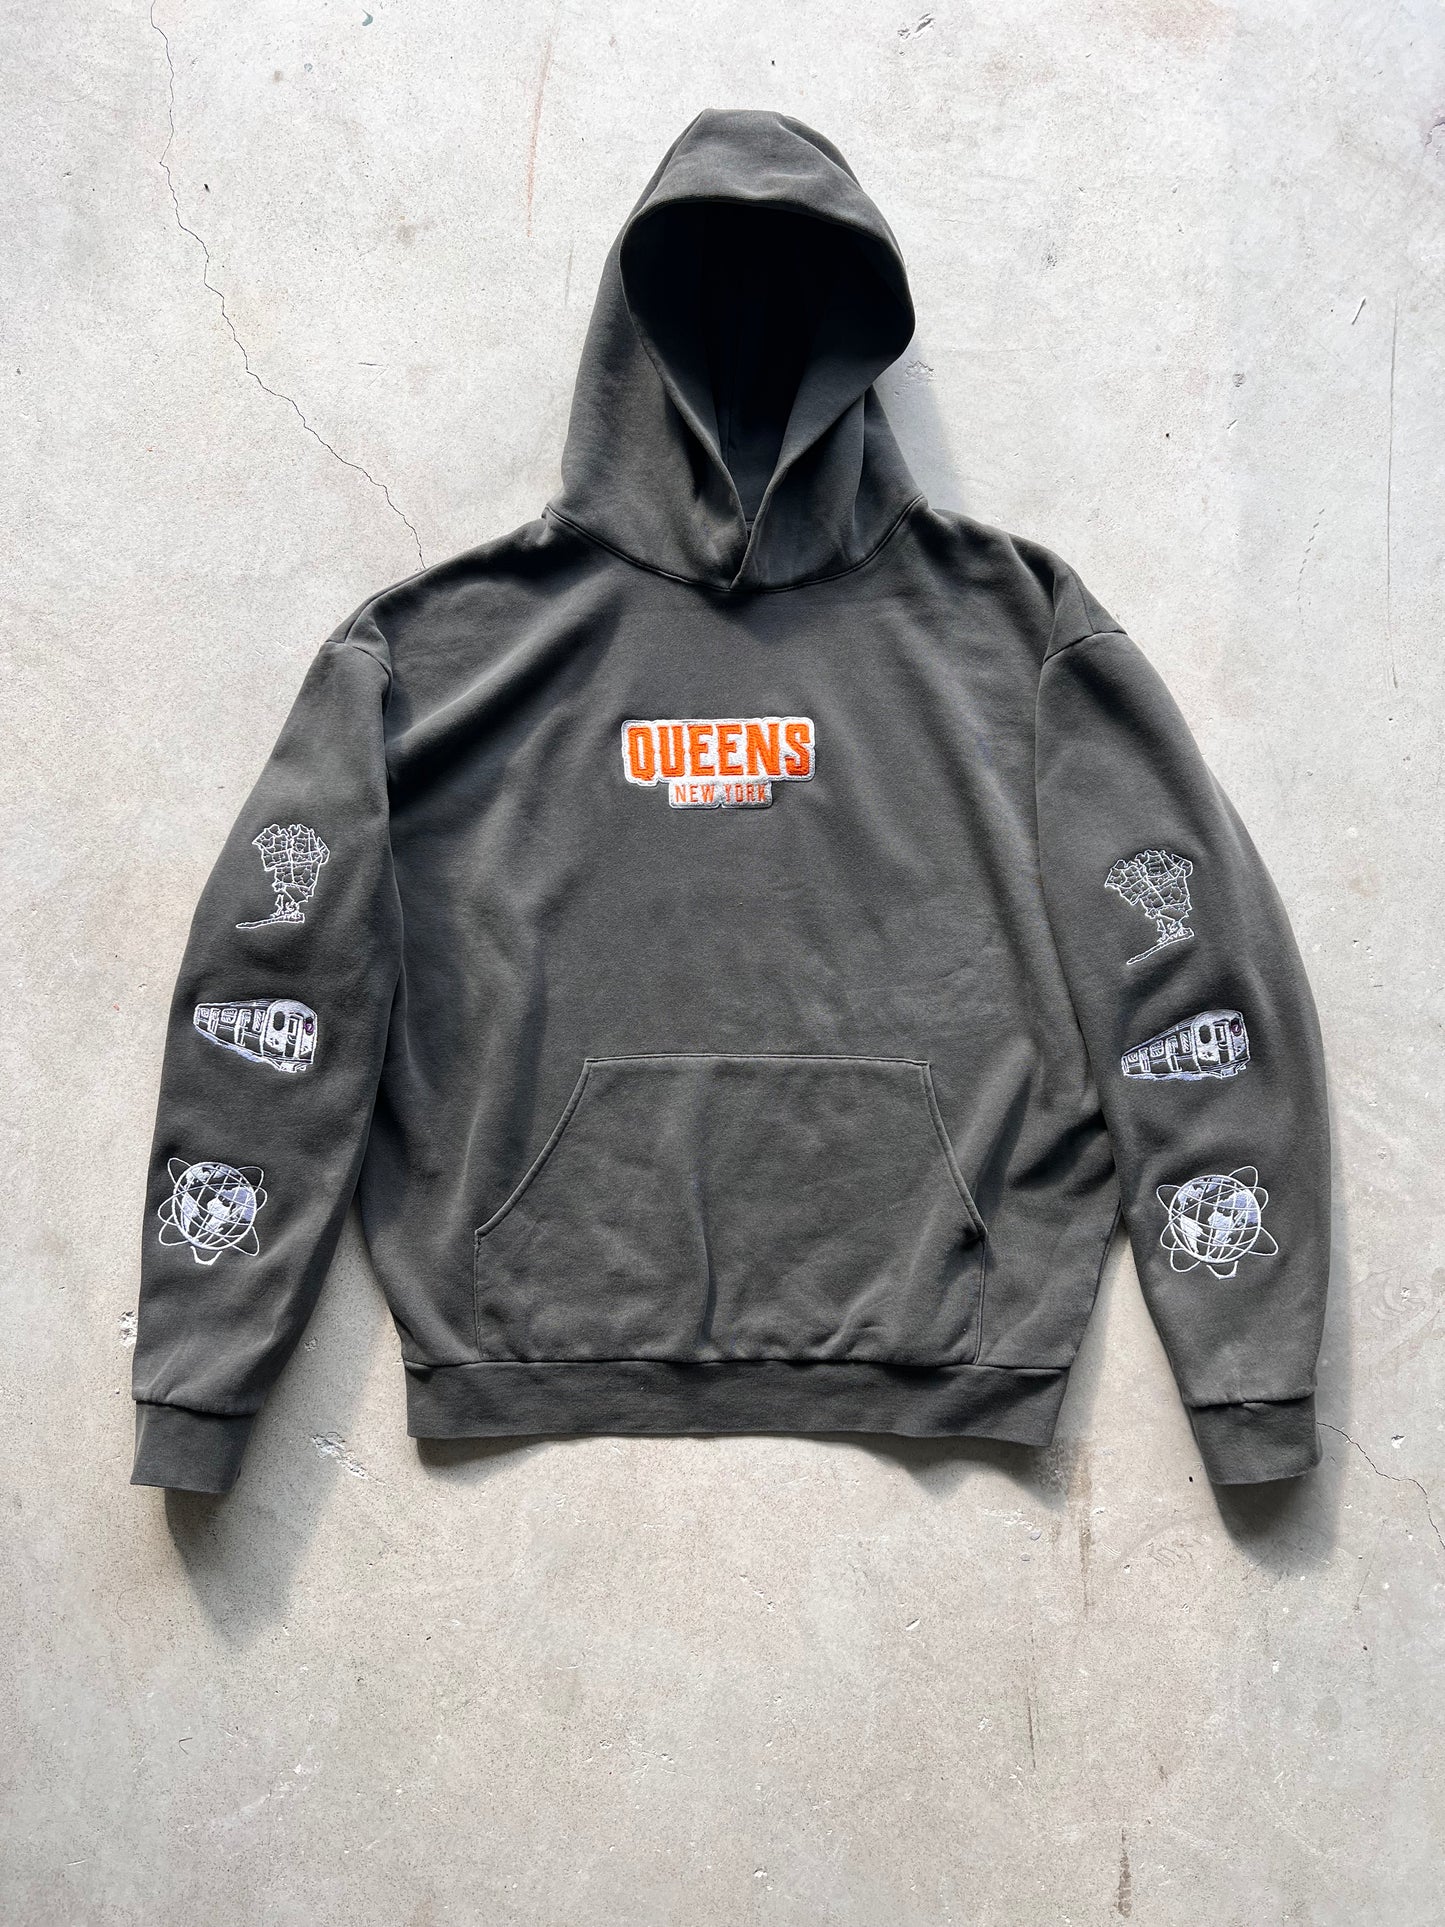 QUEENS NY Vintage Washed hoodie - Embroidered.